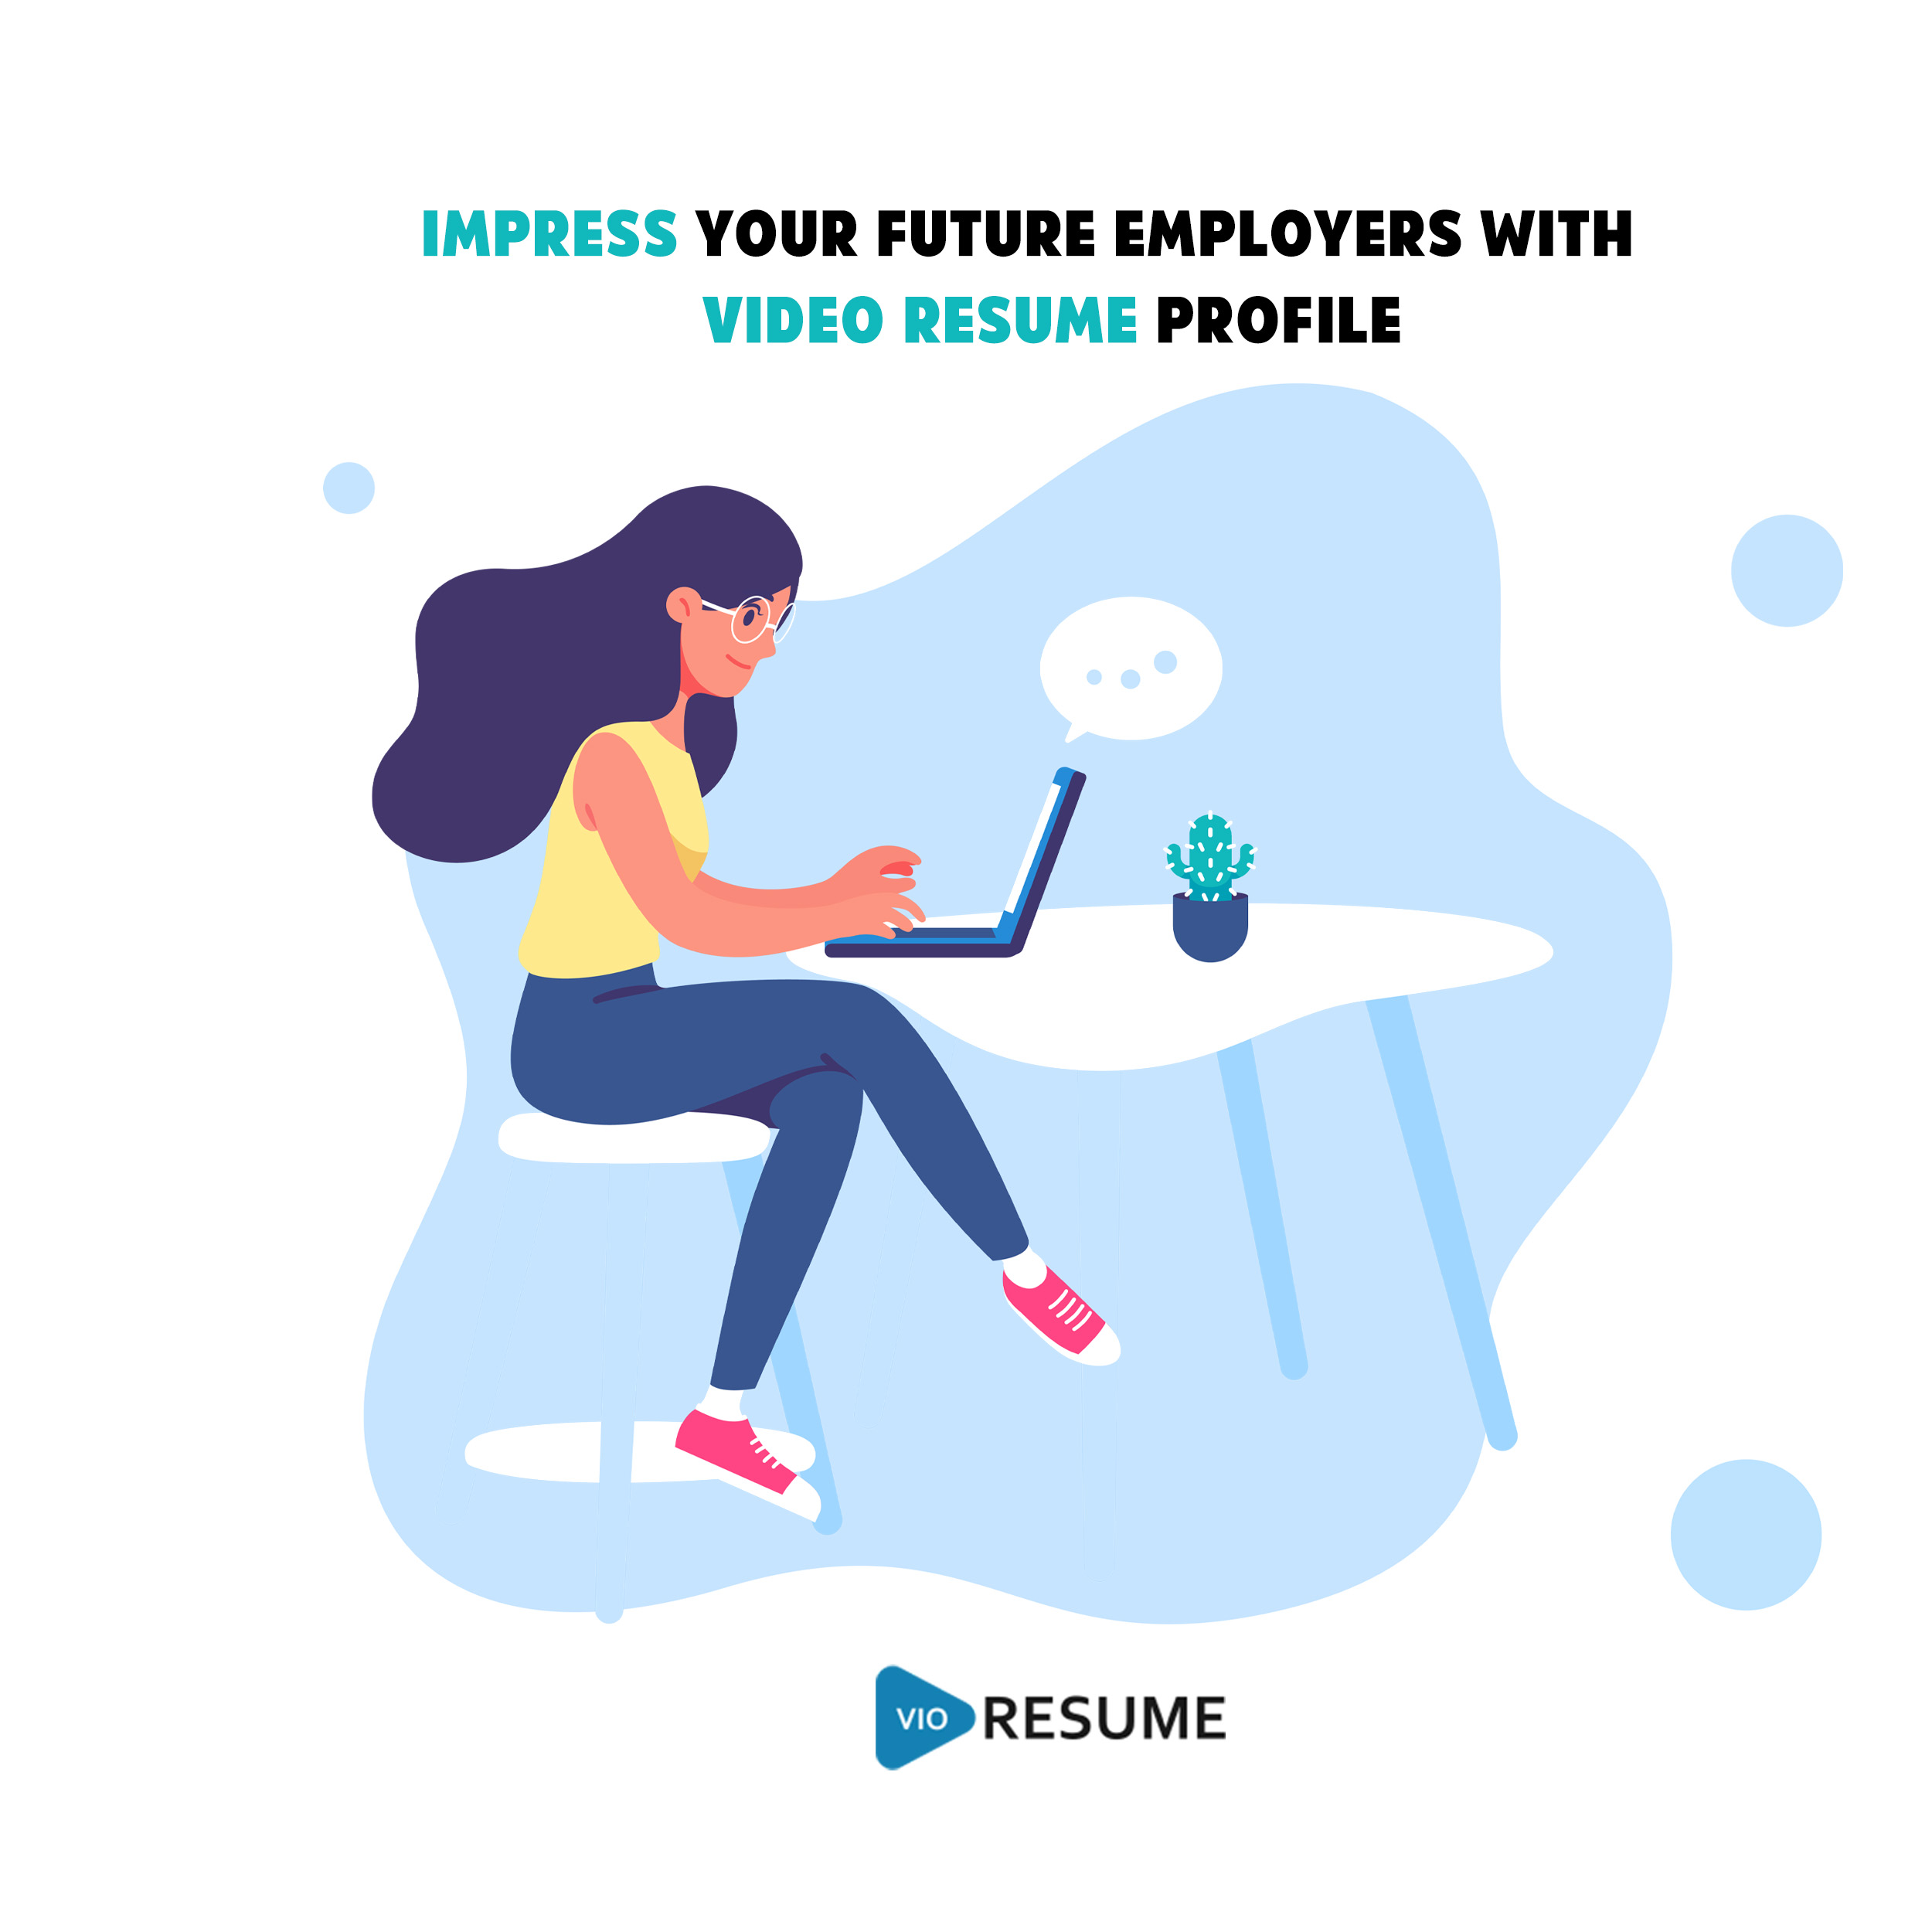 Why recruiters find video resume more effective?